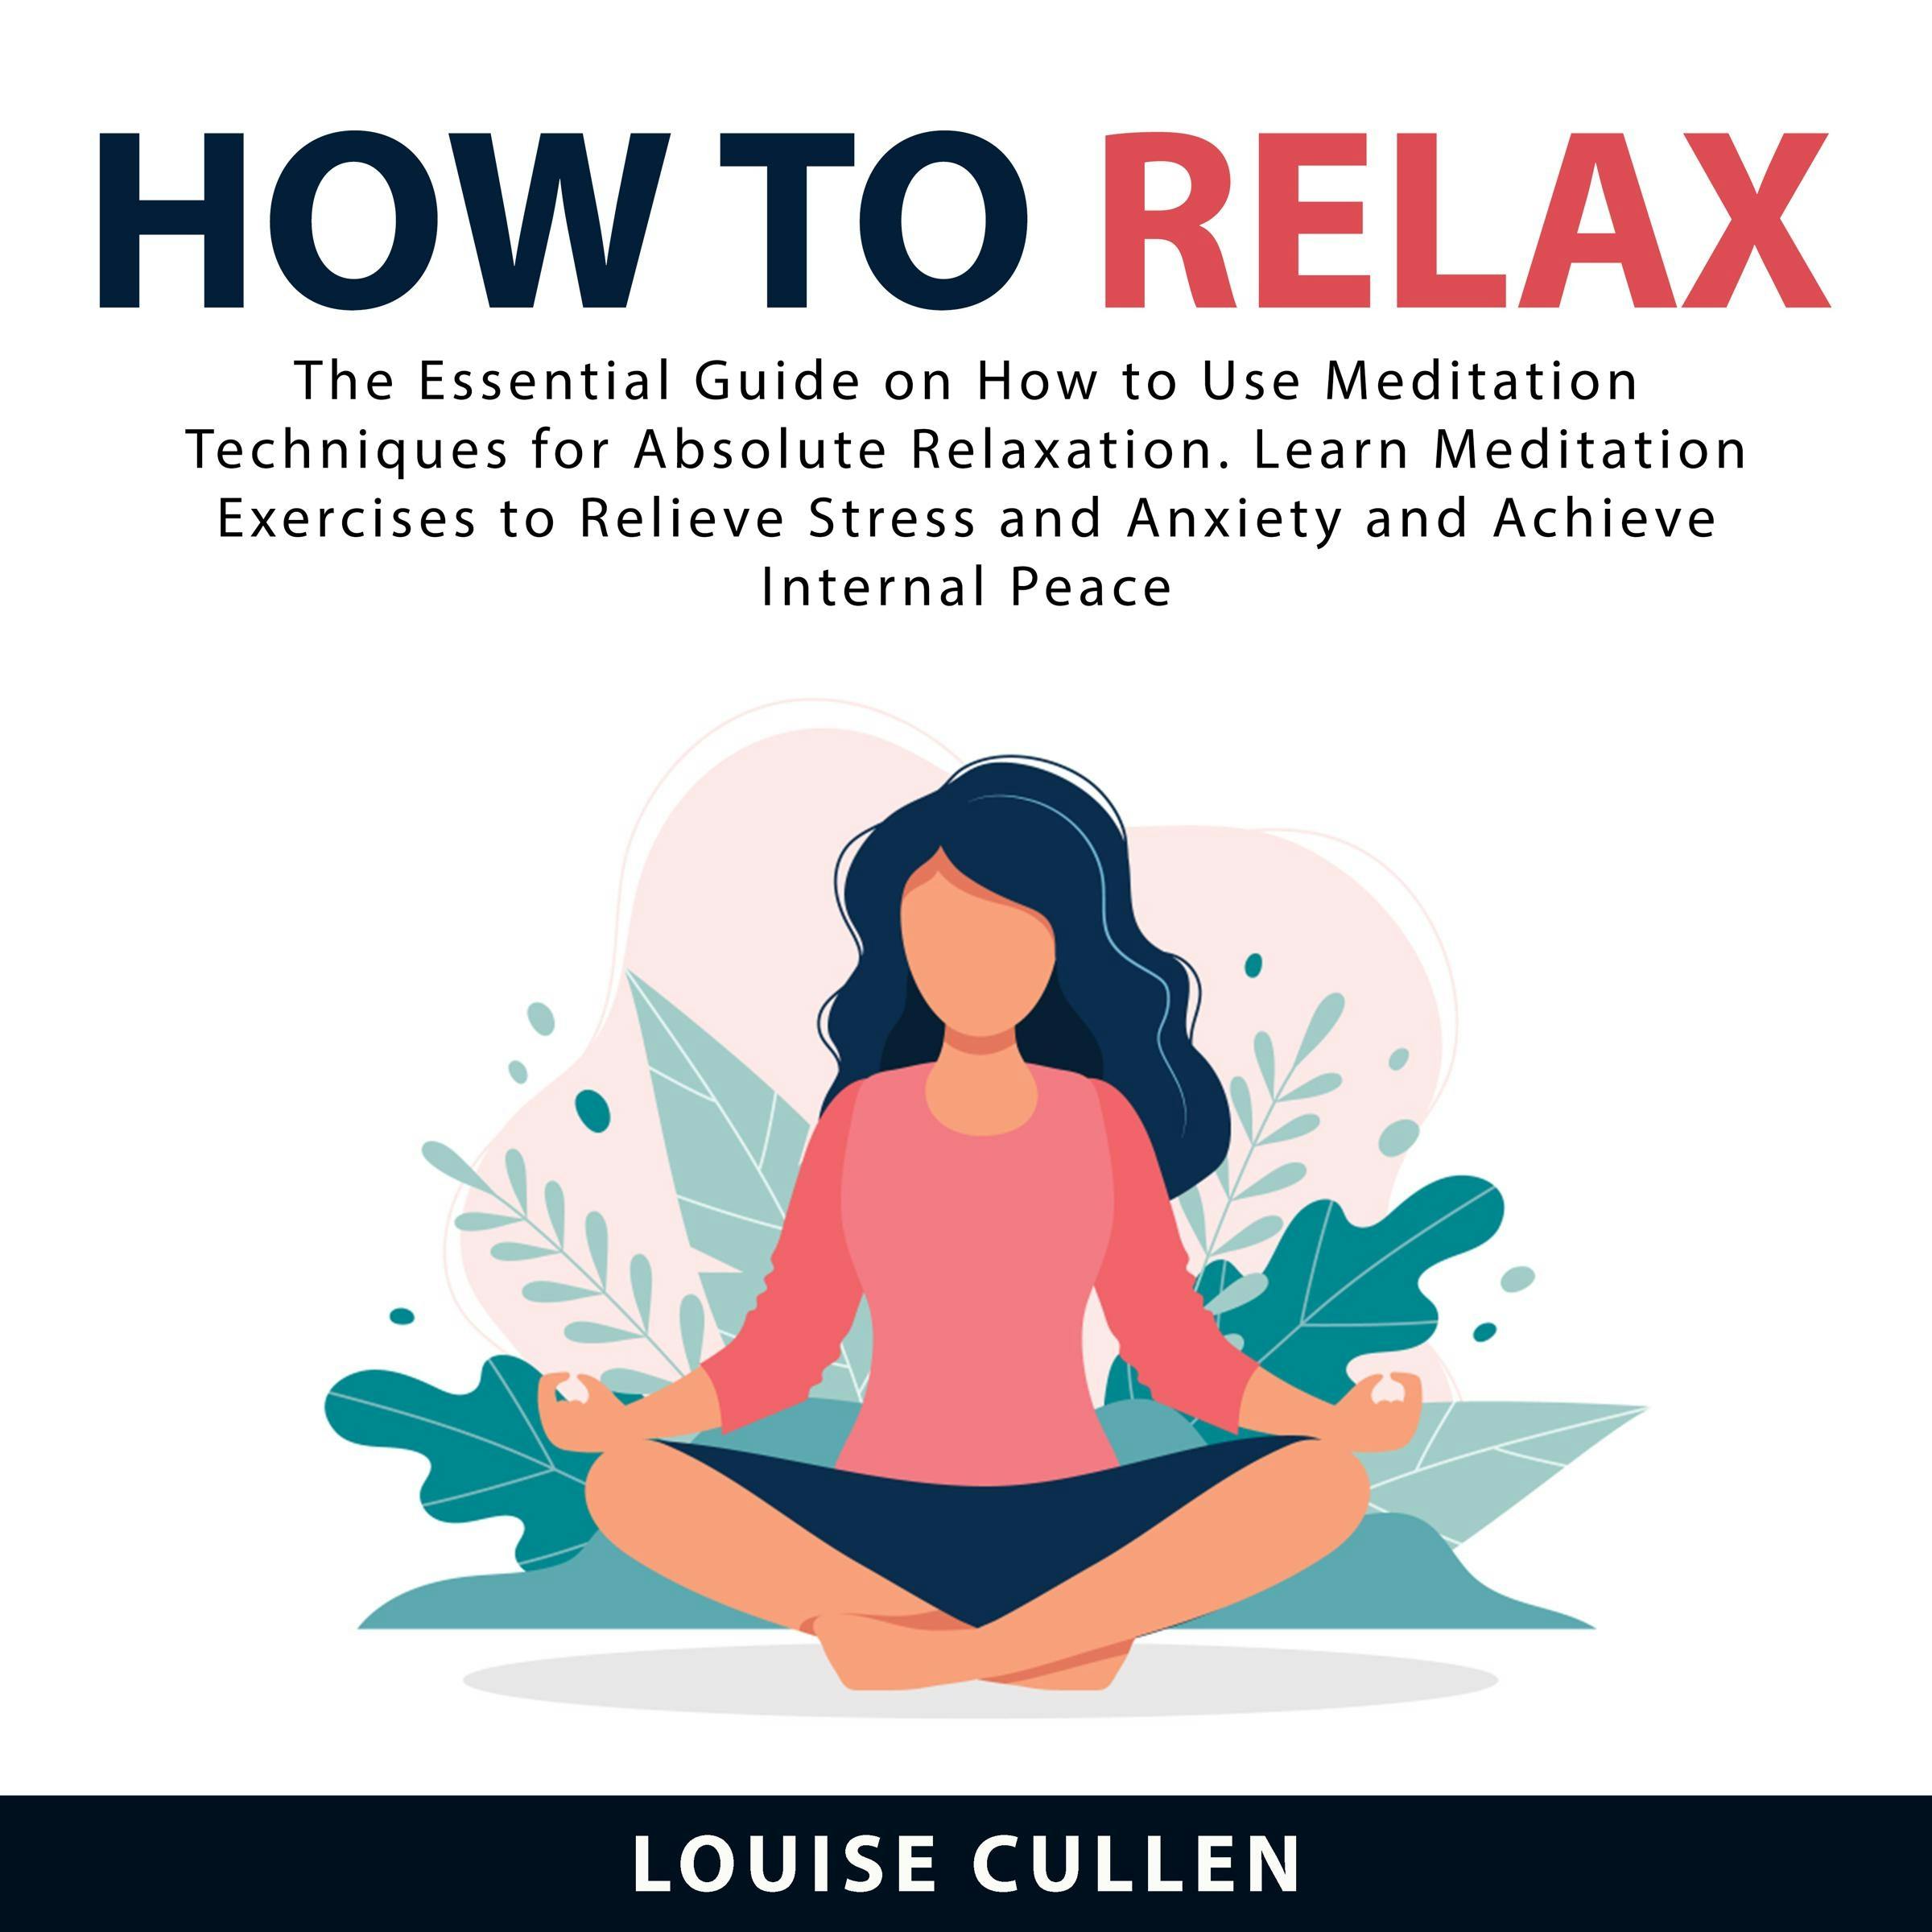 Relaxation Techniques: What You Need To Know